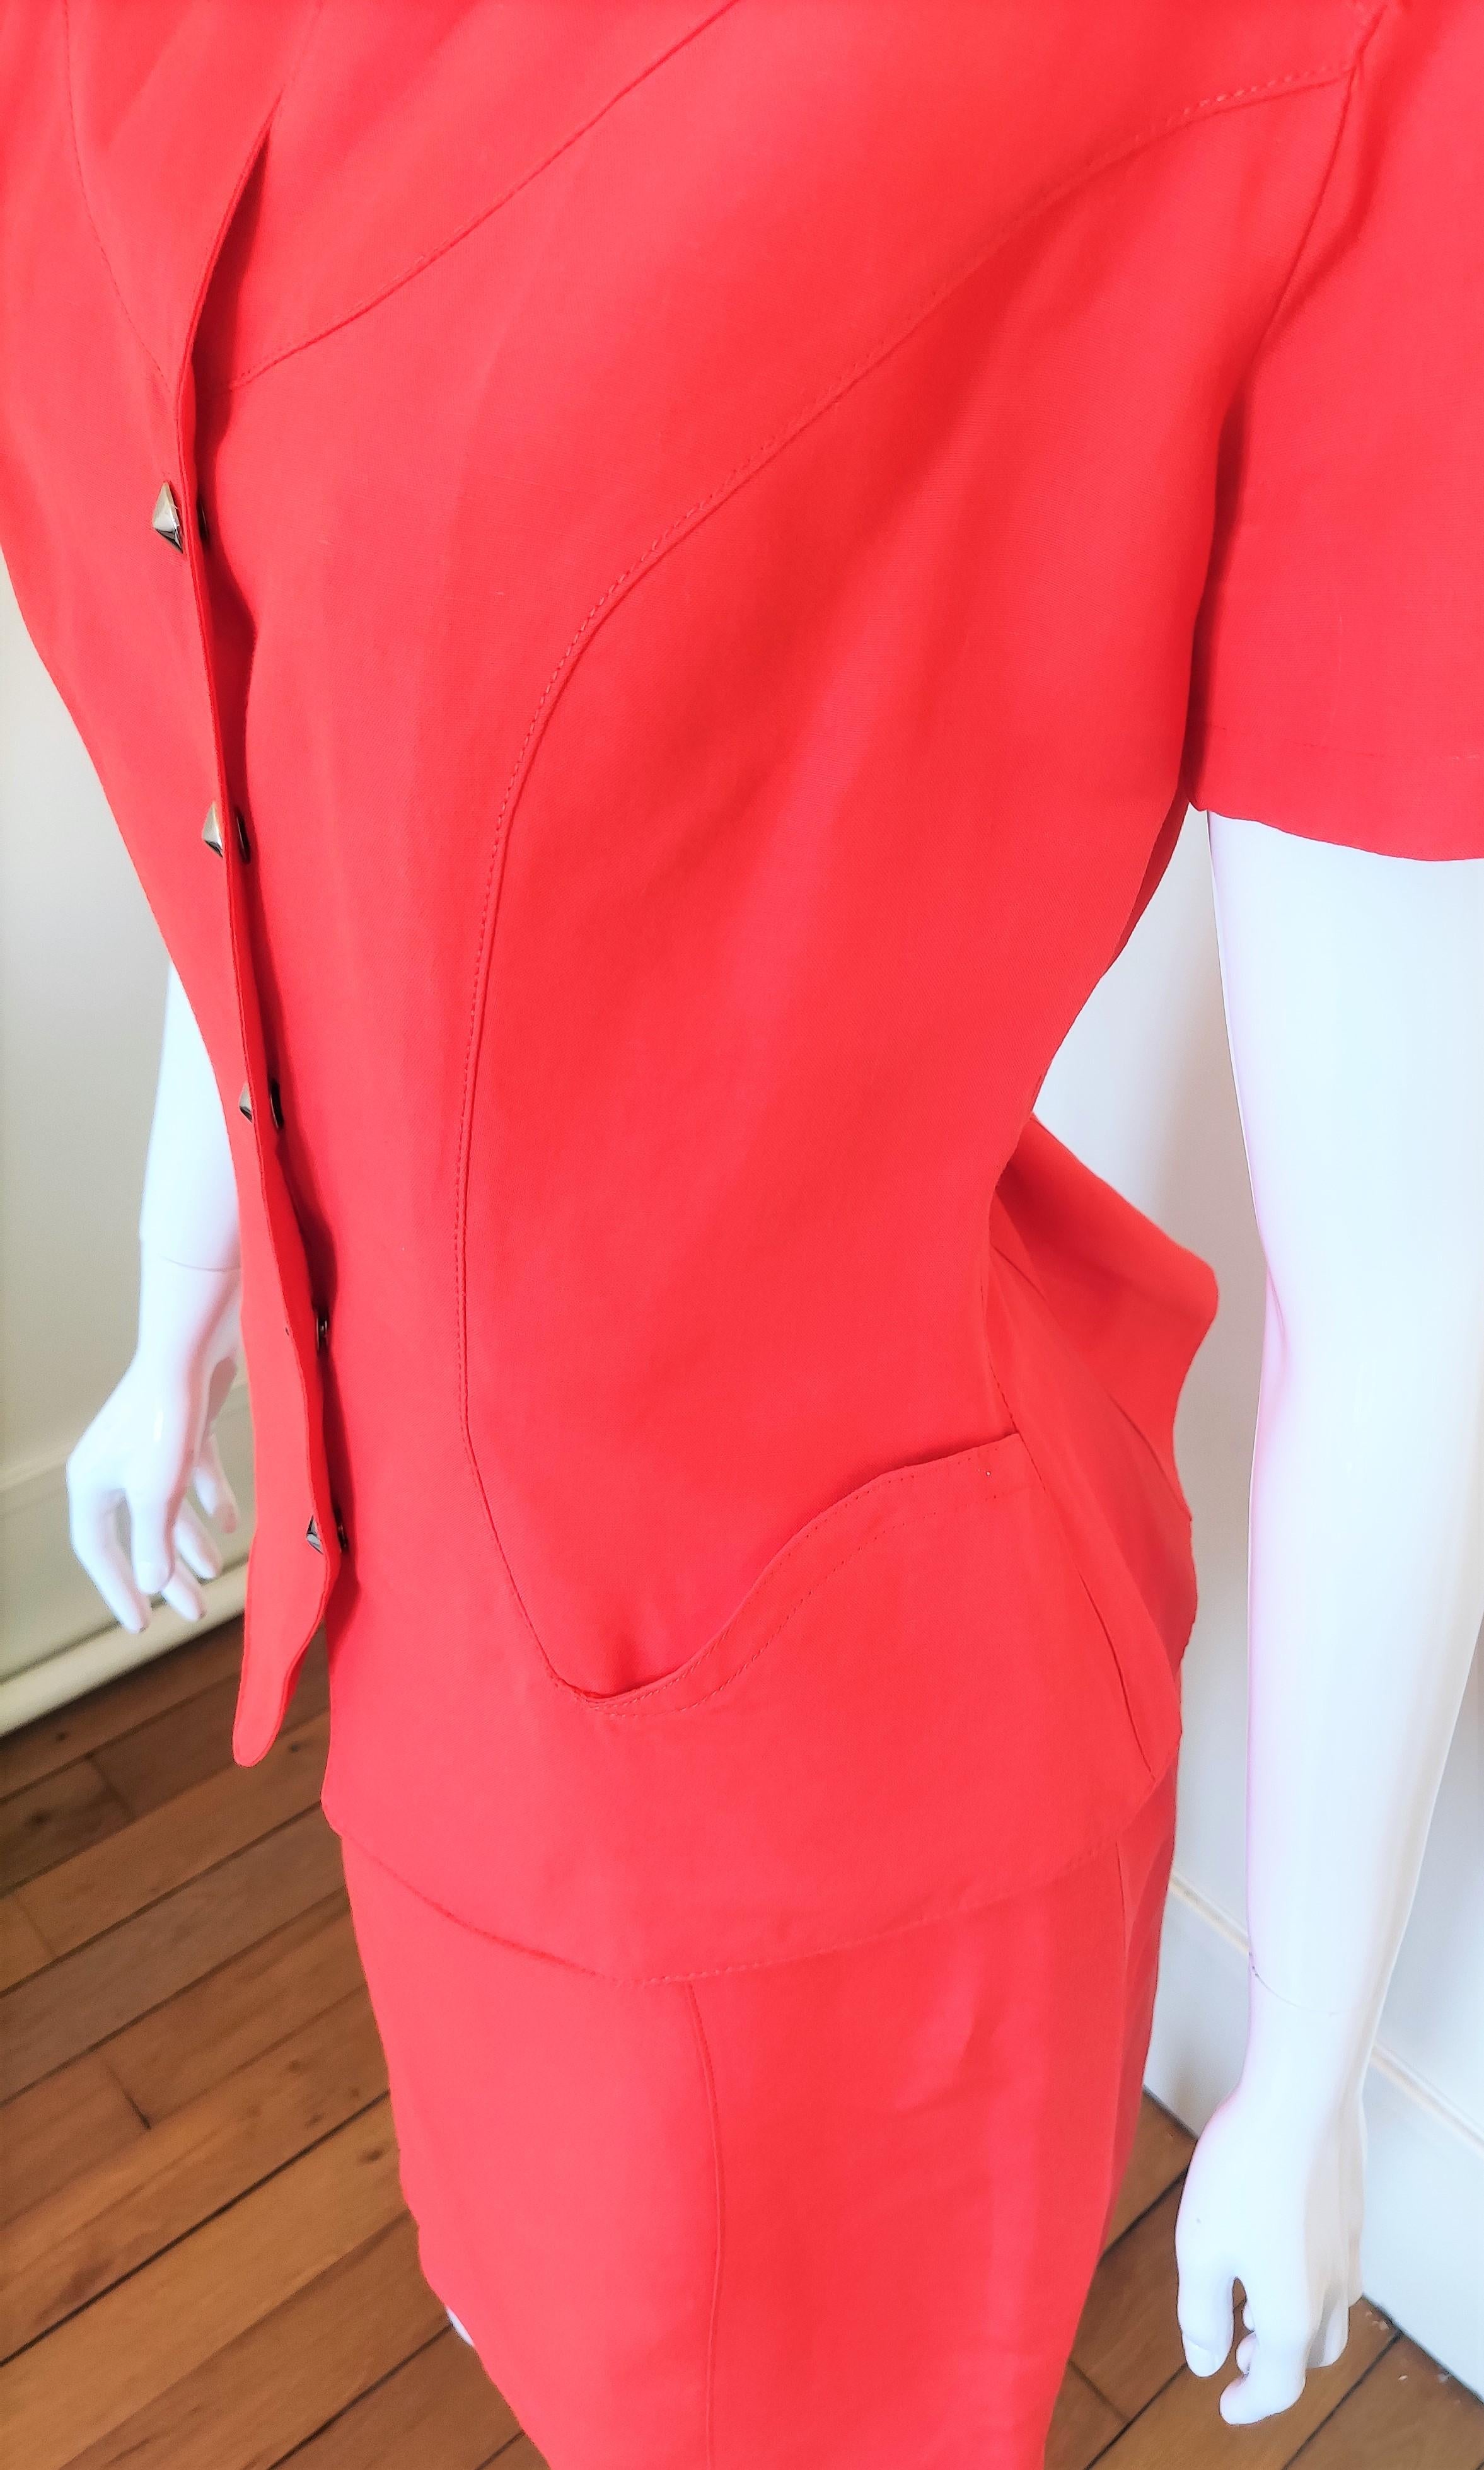 Thierry Mugler Space Future Wasp Waist Red Orange Active Dress Ensemble Suit For Sale 5